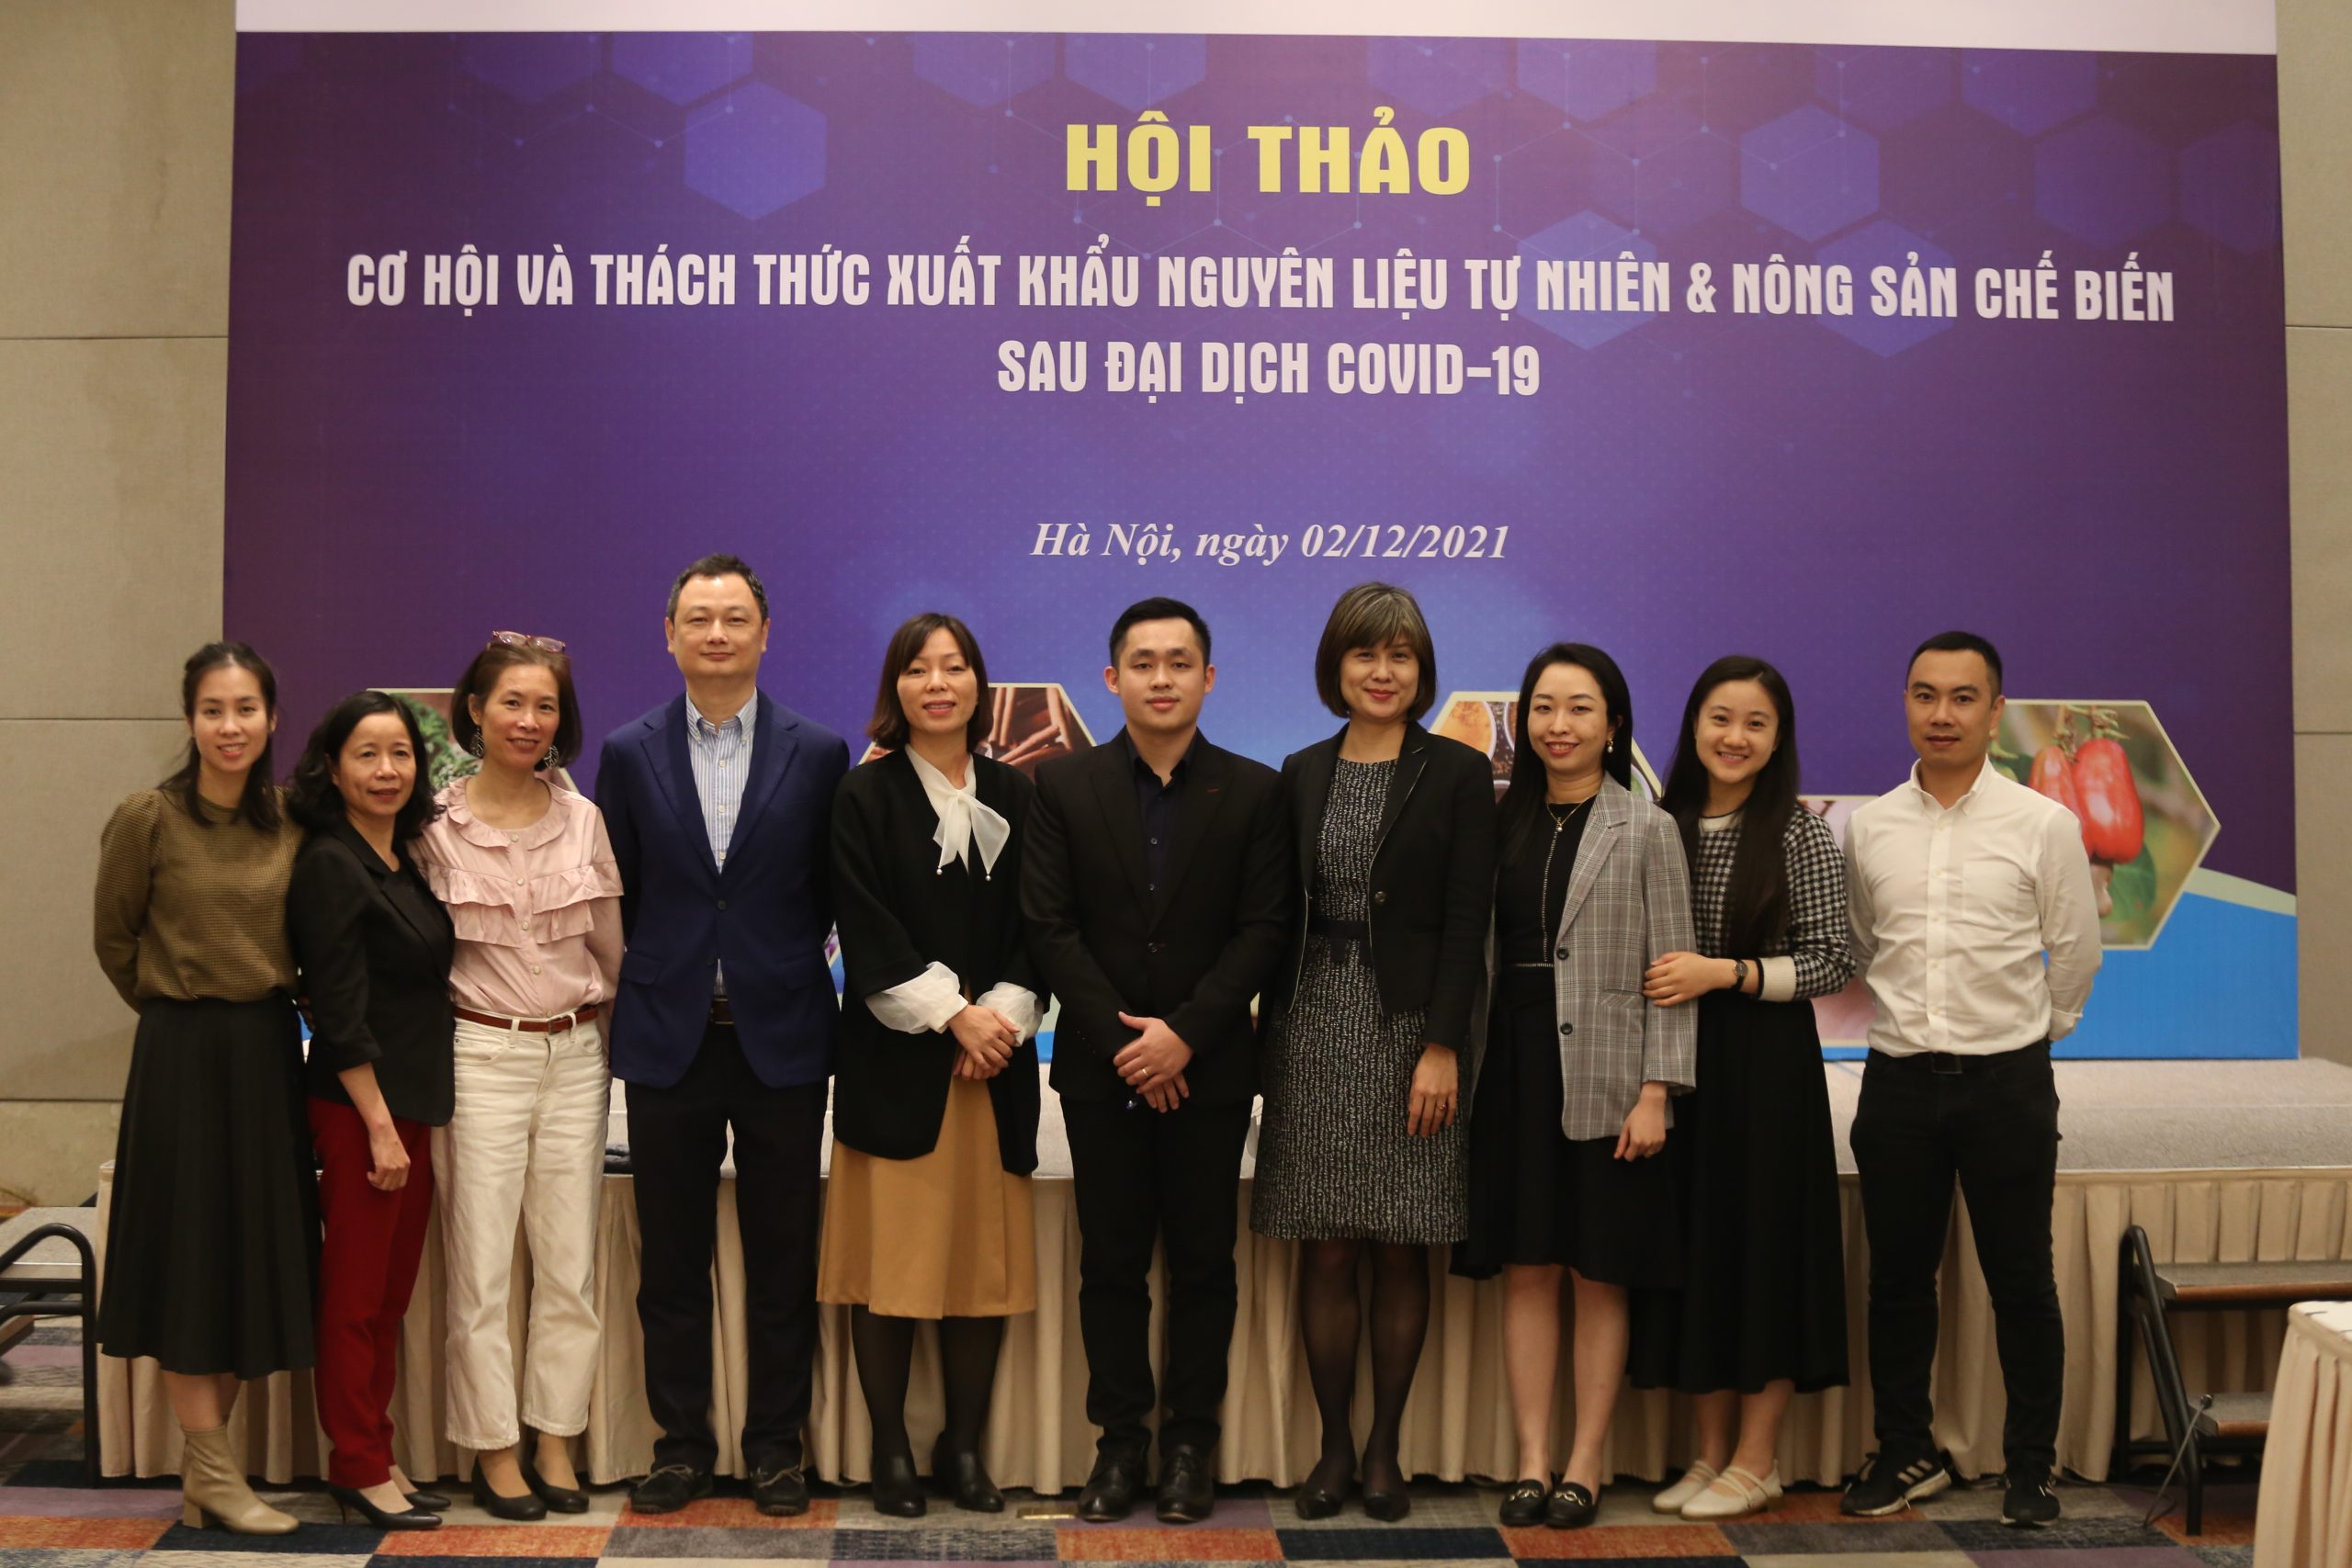 Workshop “Post Covid 19 challenges and opportunities for Vietnam SMEs in natural ingredients and processed food sectors”